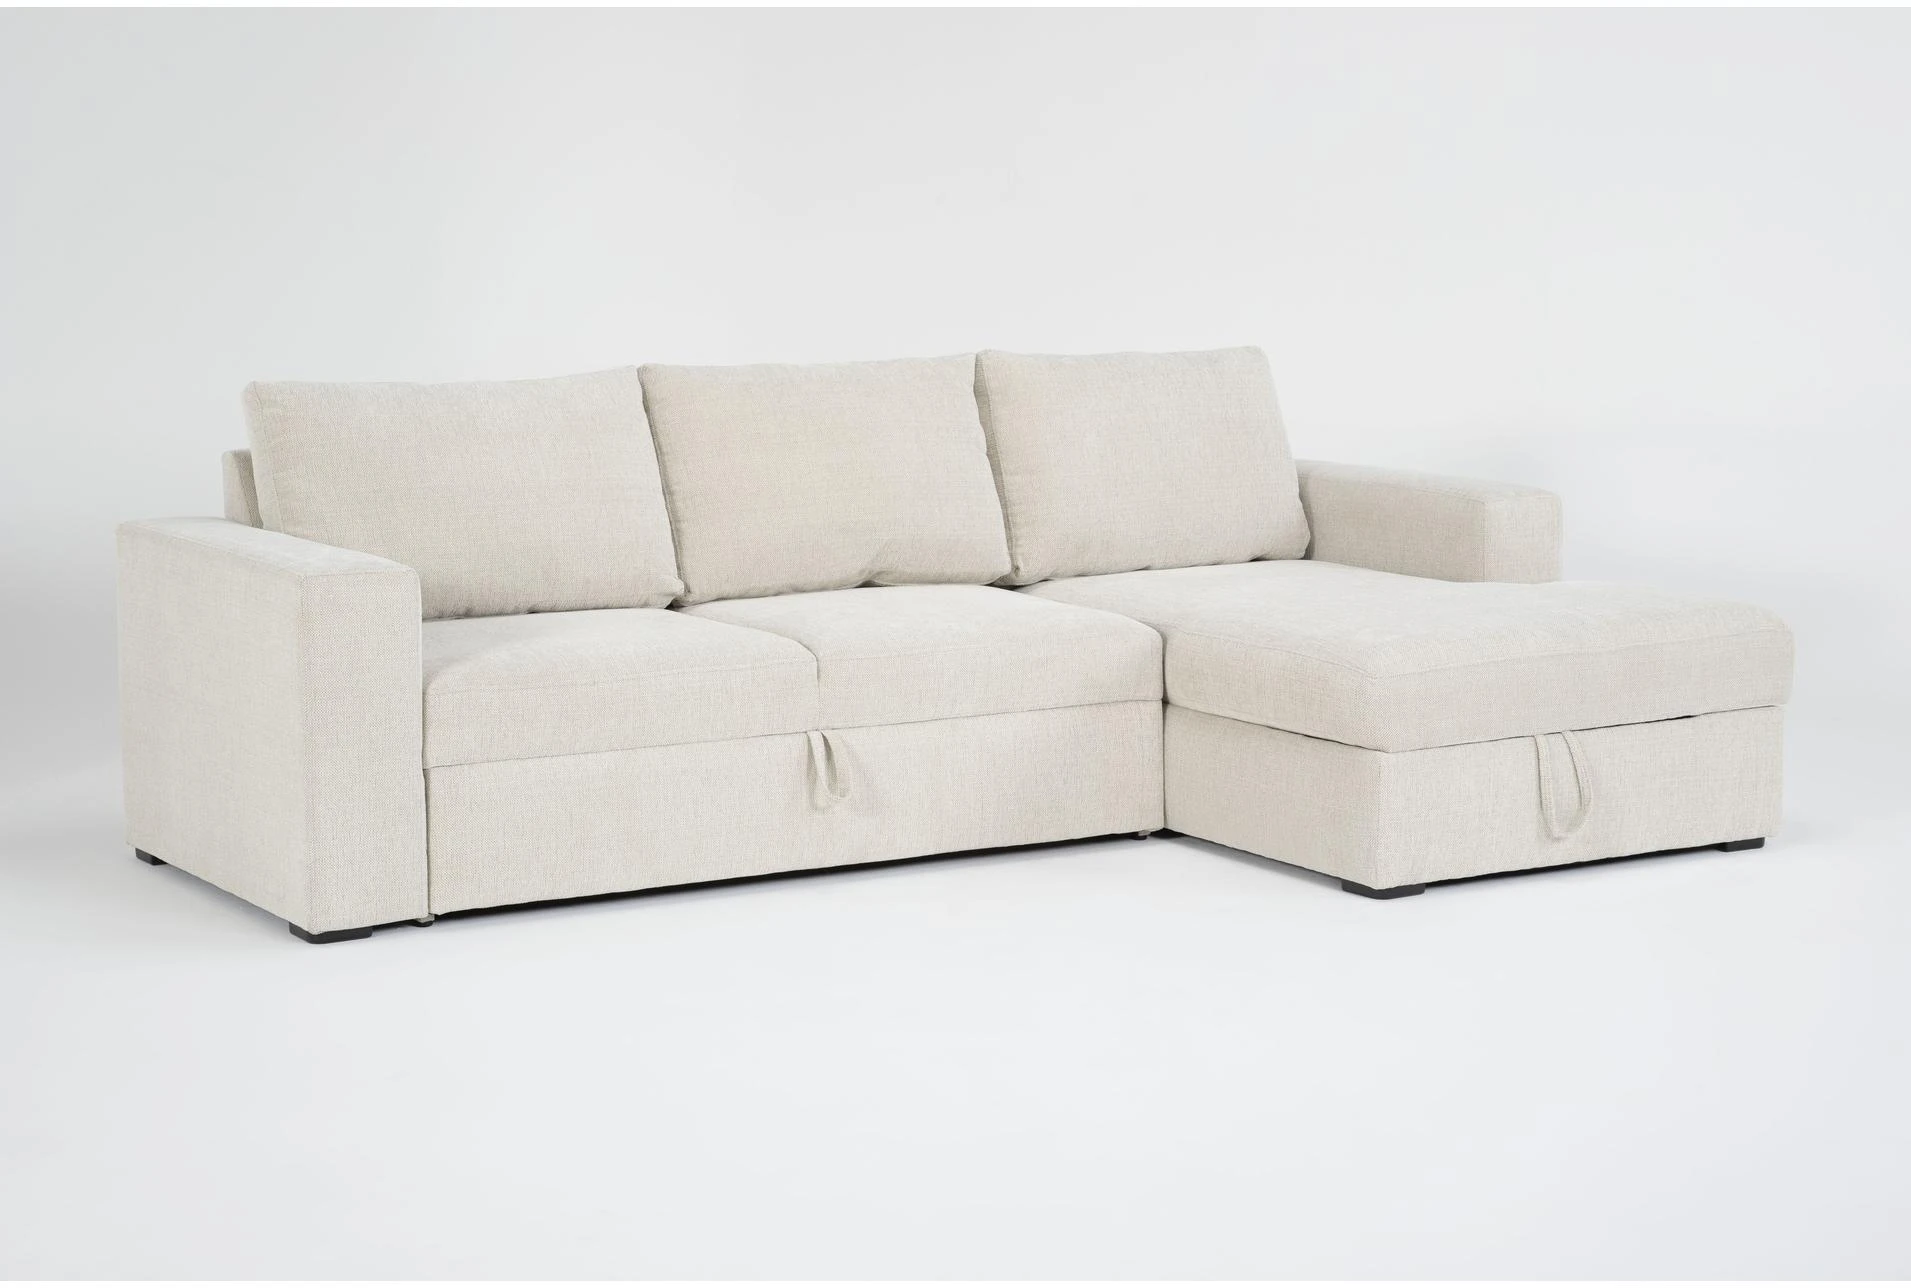 Sebastian Cream 111" 2 Piece Convertible Sleeper Sectional with Right Arm Facing Storage Chaise